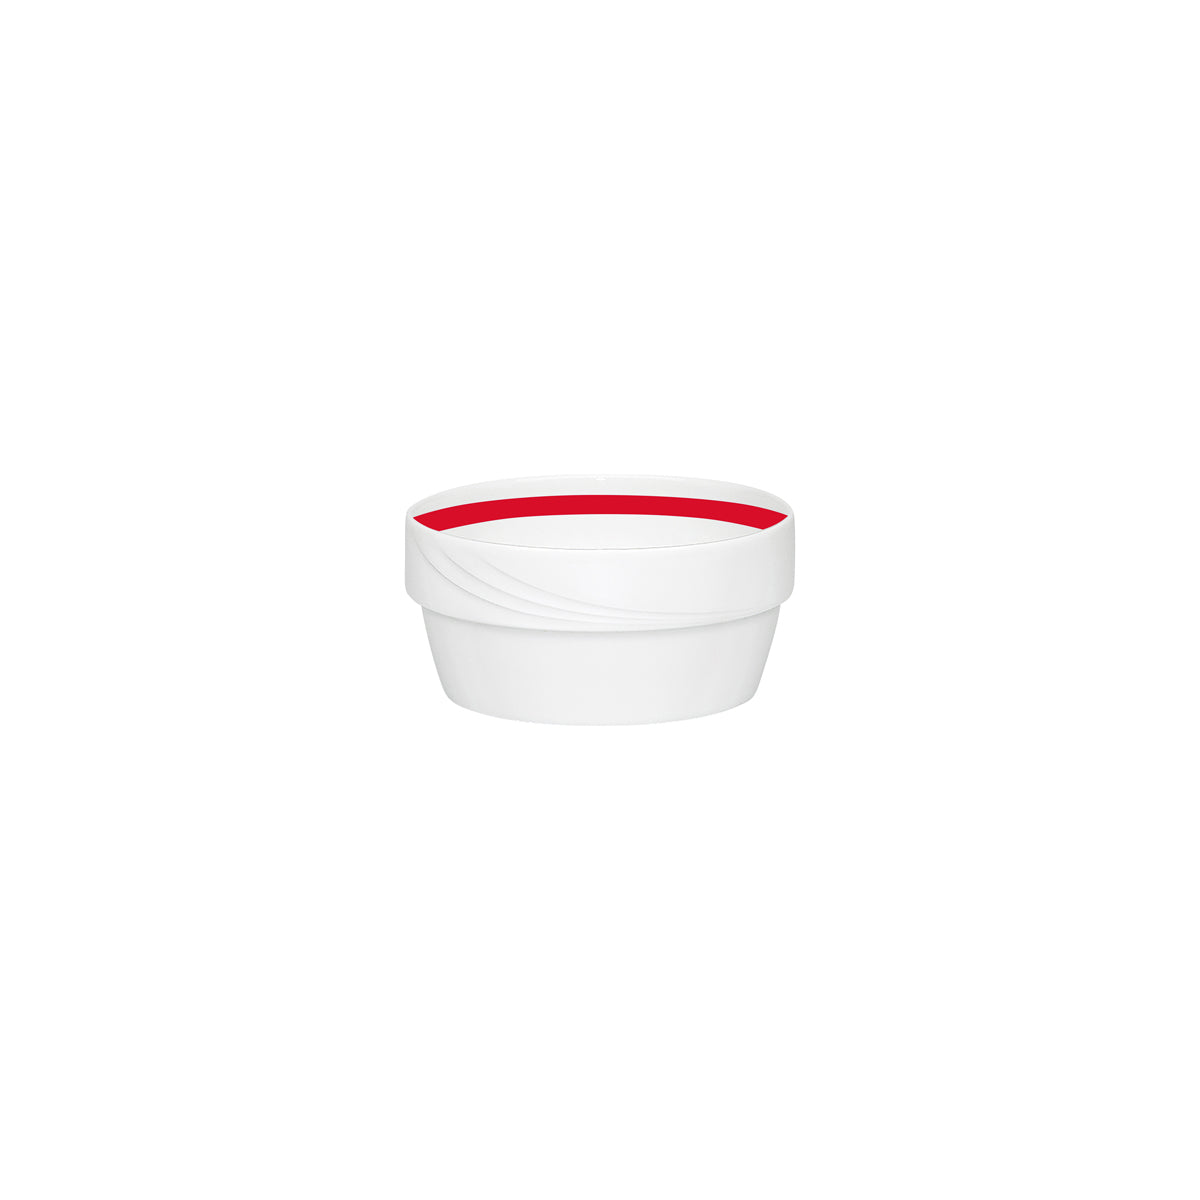 SH9185745/62931 Donna Senior Decor Stackable Round Soup Bowl with Red Band 125x59mm / 470ml Tomkin Australia Hospitality Supplies